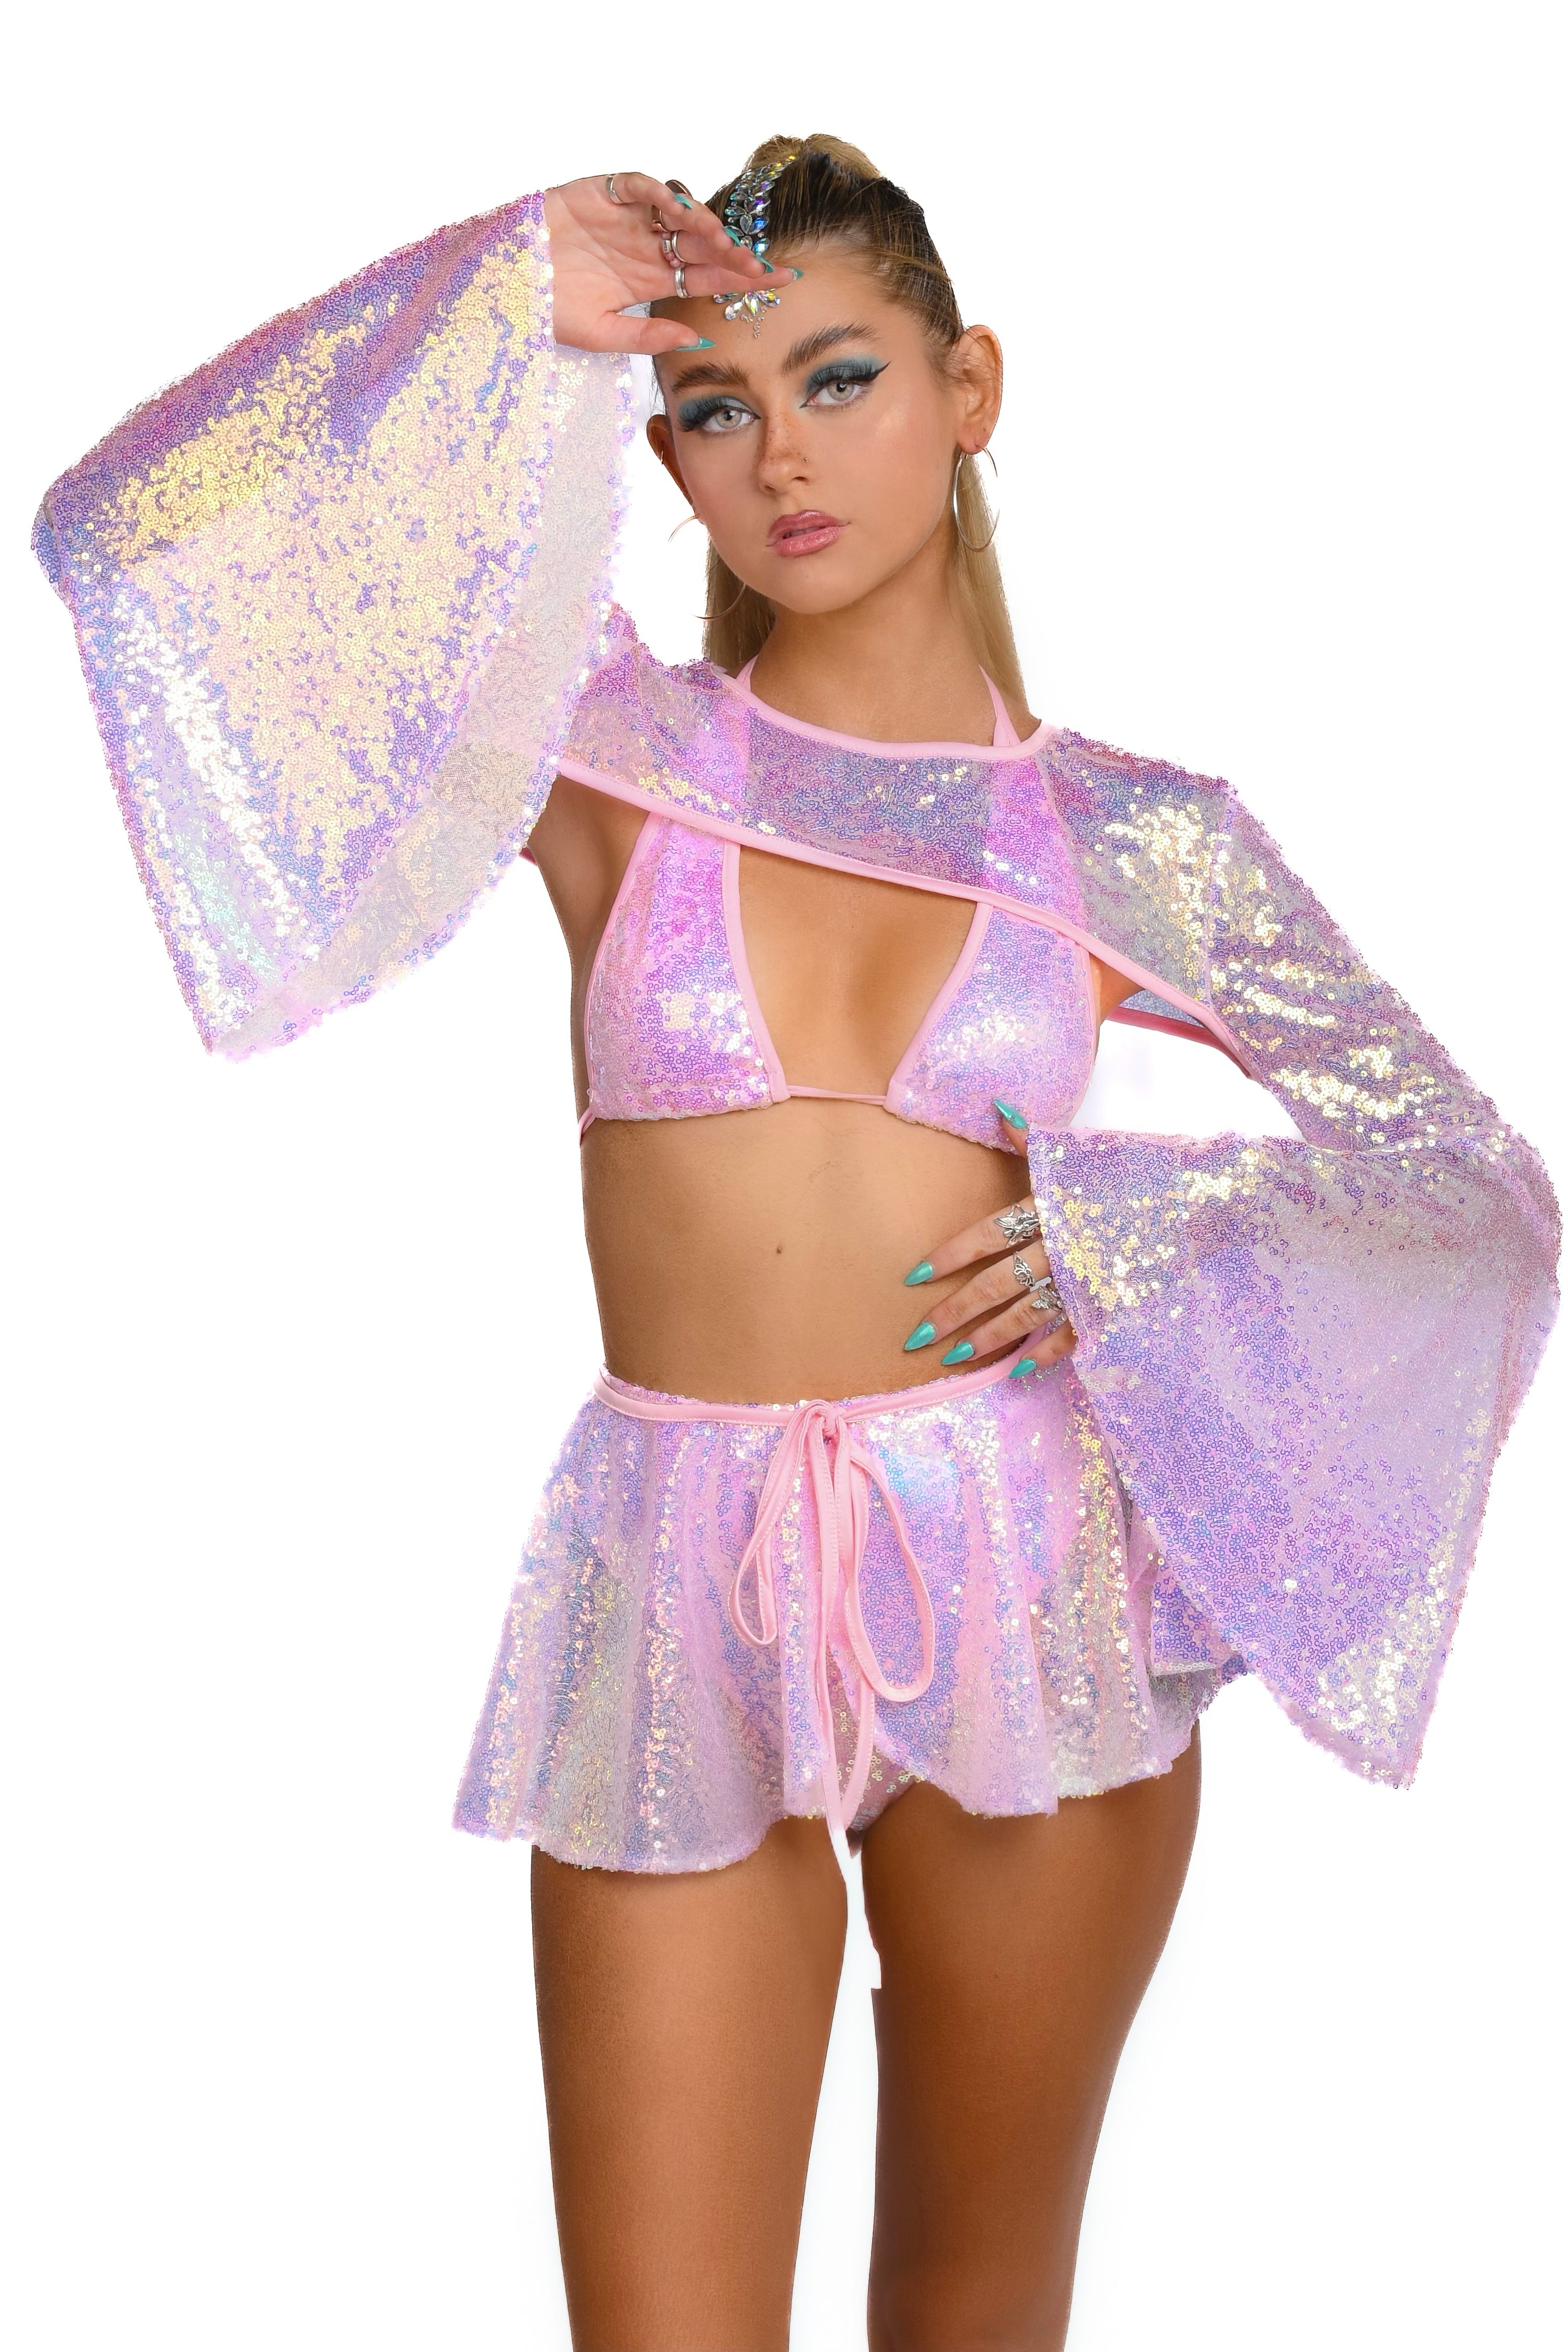 FULL OUTFIT- Cotton Candy Goddess Sequin Set (4 pcs)